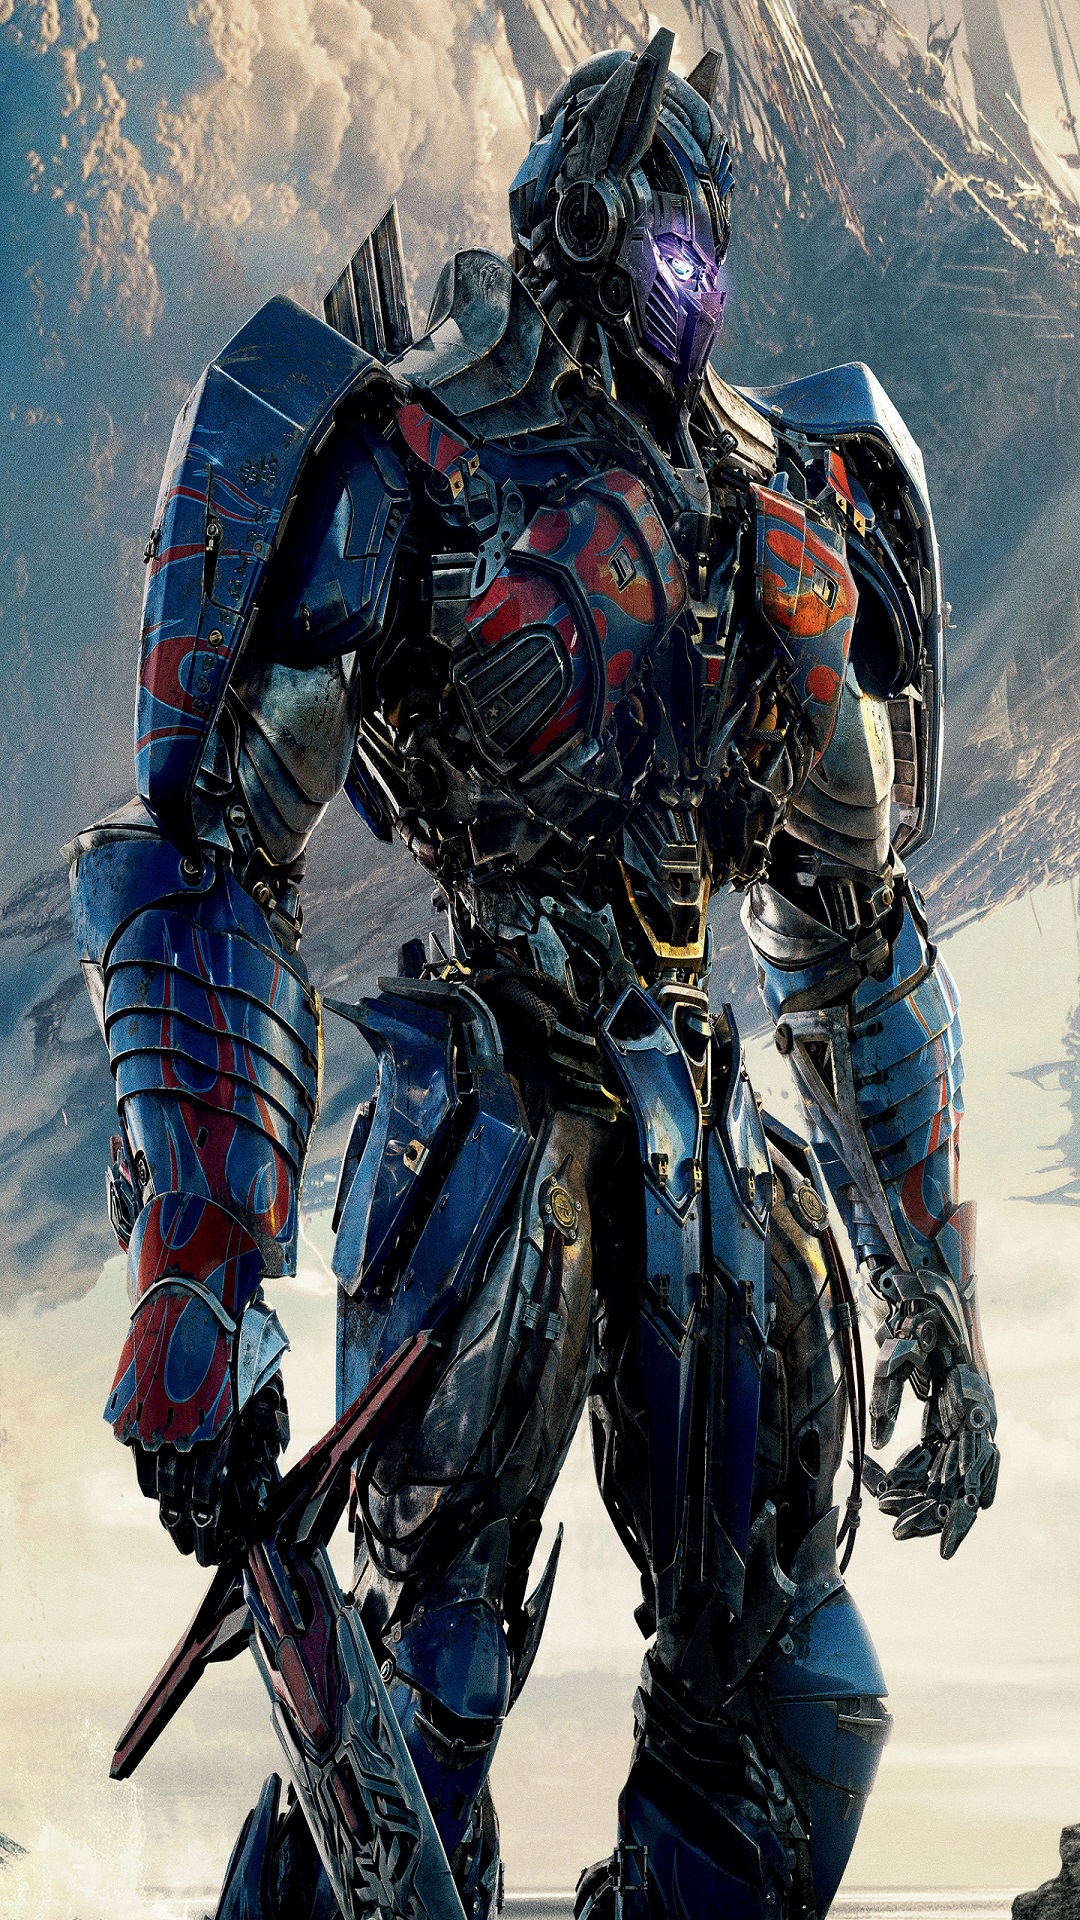 Optimus Prime Transformers The Last Knight for Apple iPhone 6S & 7 Plus resolution